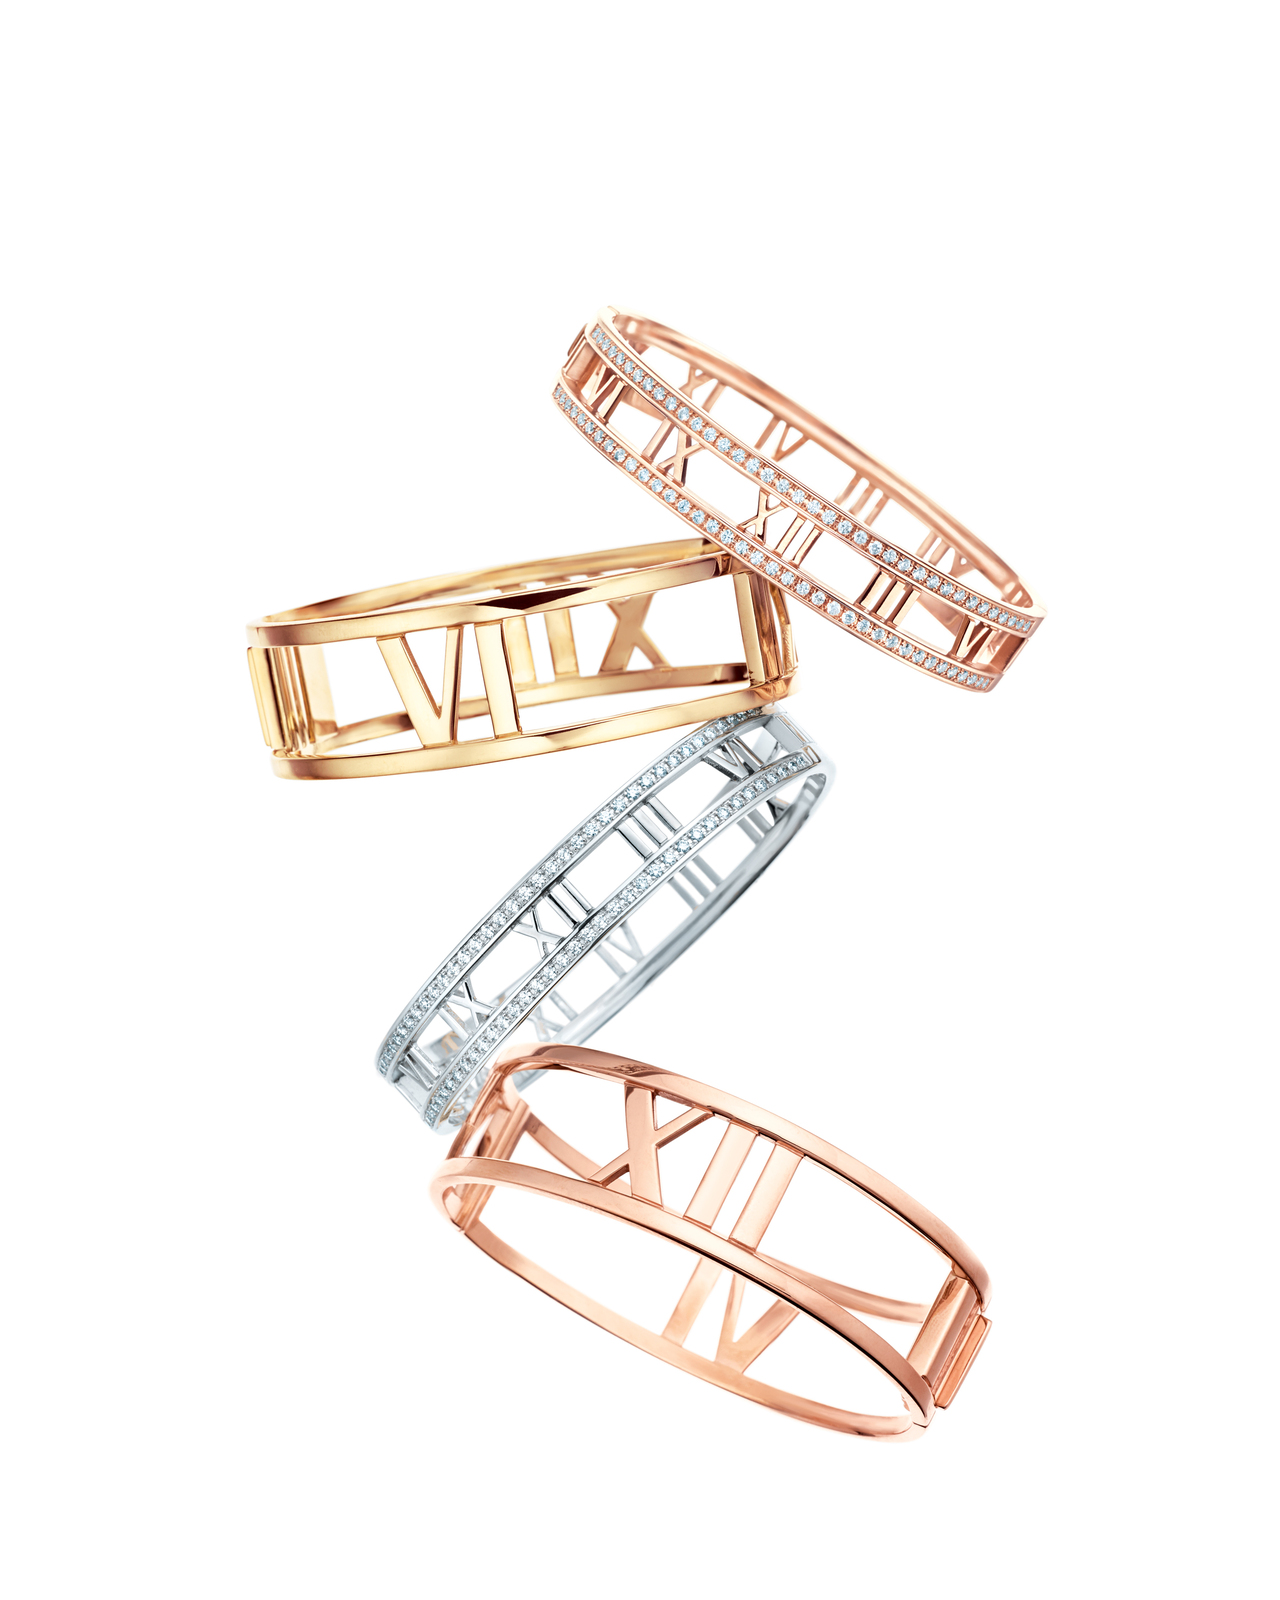 NUVO Holiday Wish List: Tiffany & Co Atlas Collection